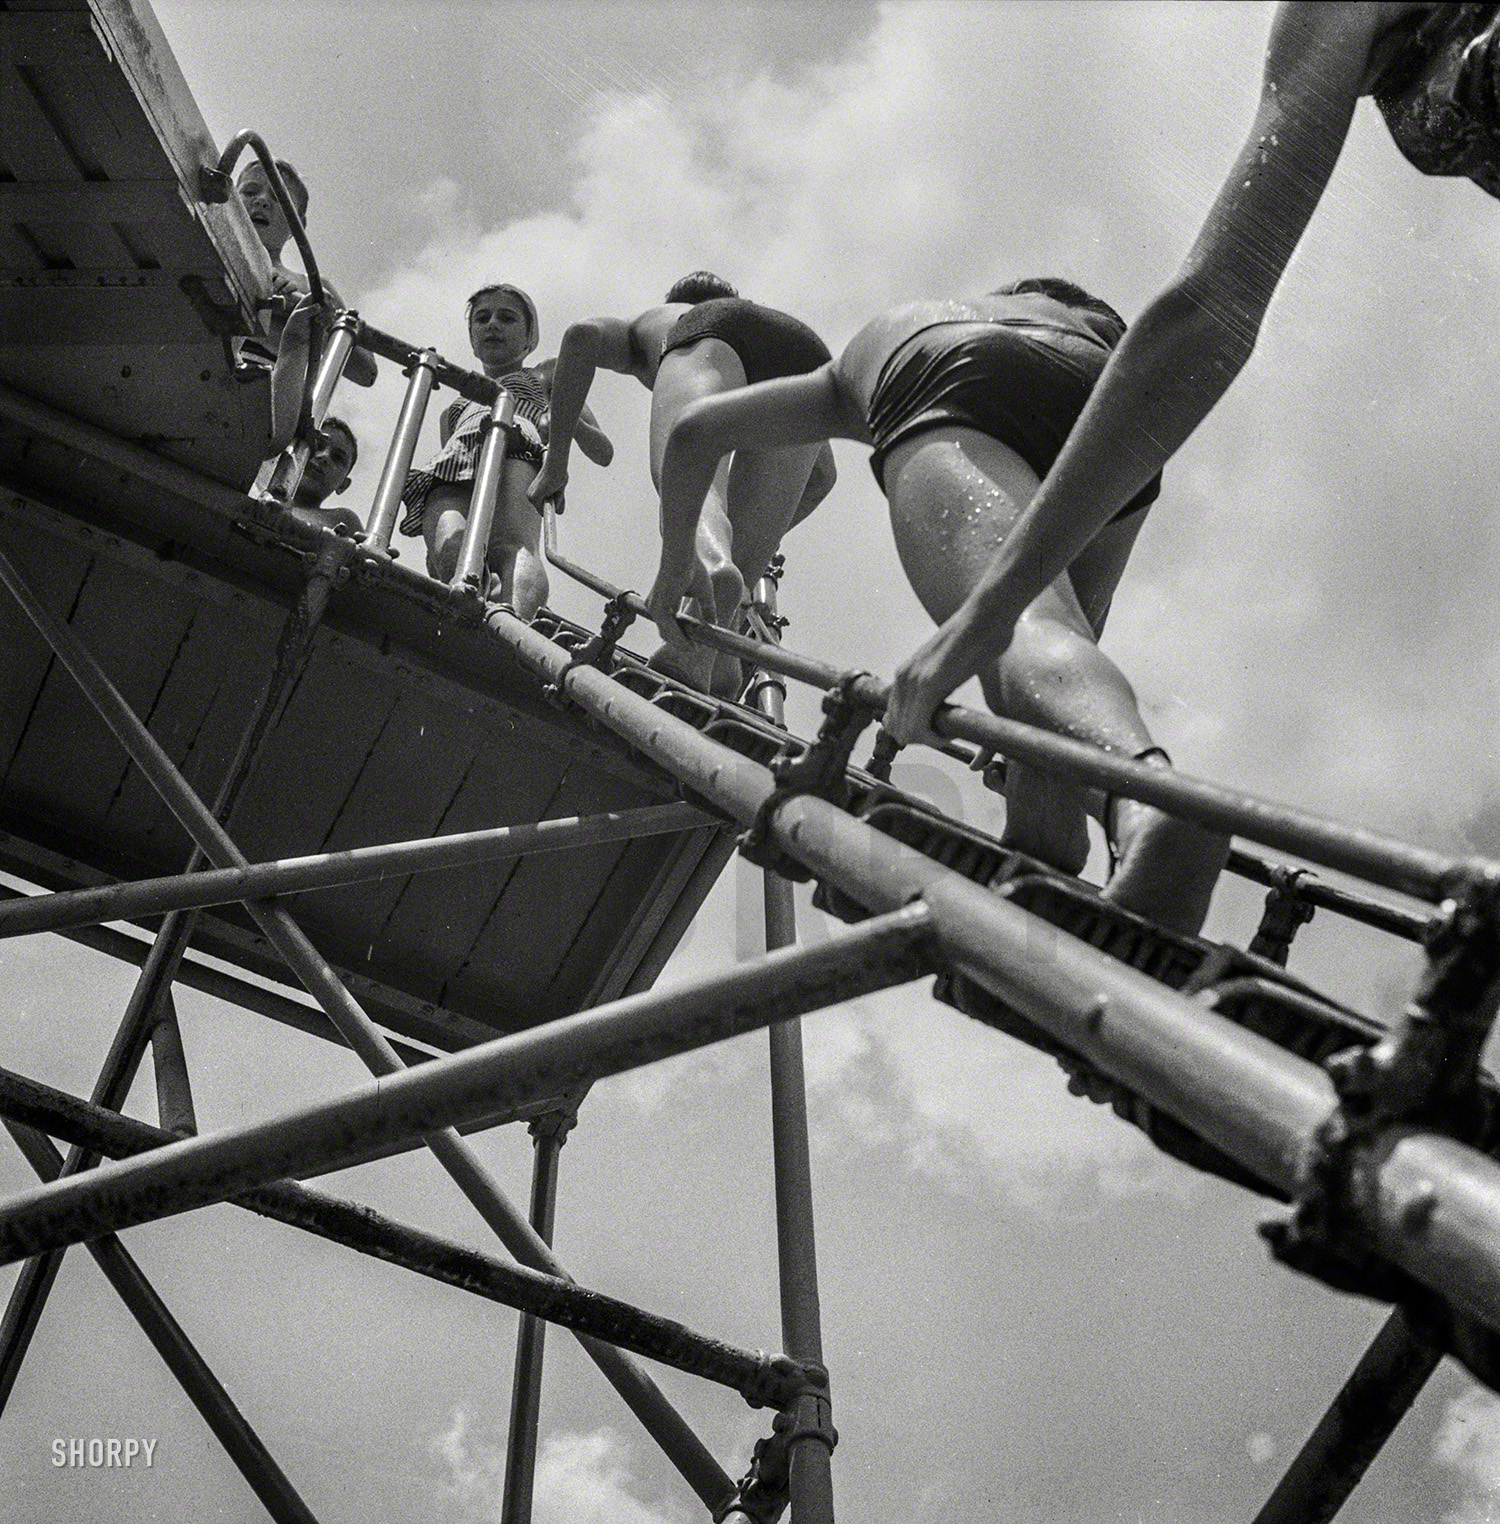 July 1943. Glen Echo, Maryland. "Climbing the ladder to the sliding board at the Glen Echo swimming pool on a hot day." Photo by Esther Bubley. View full size.